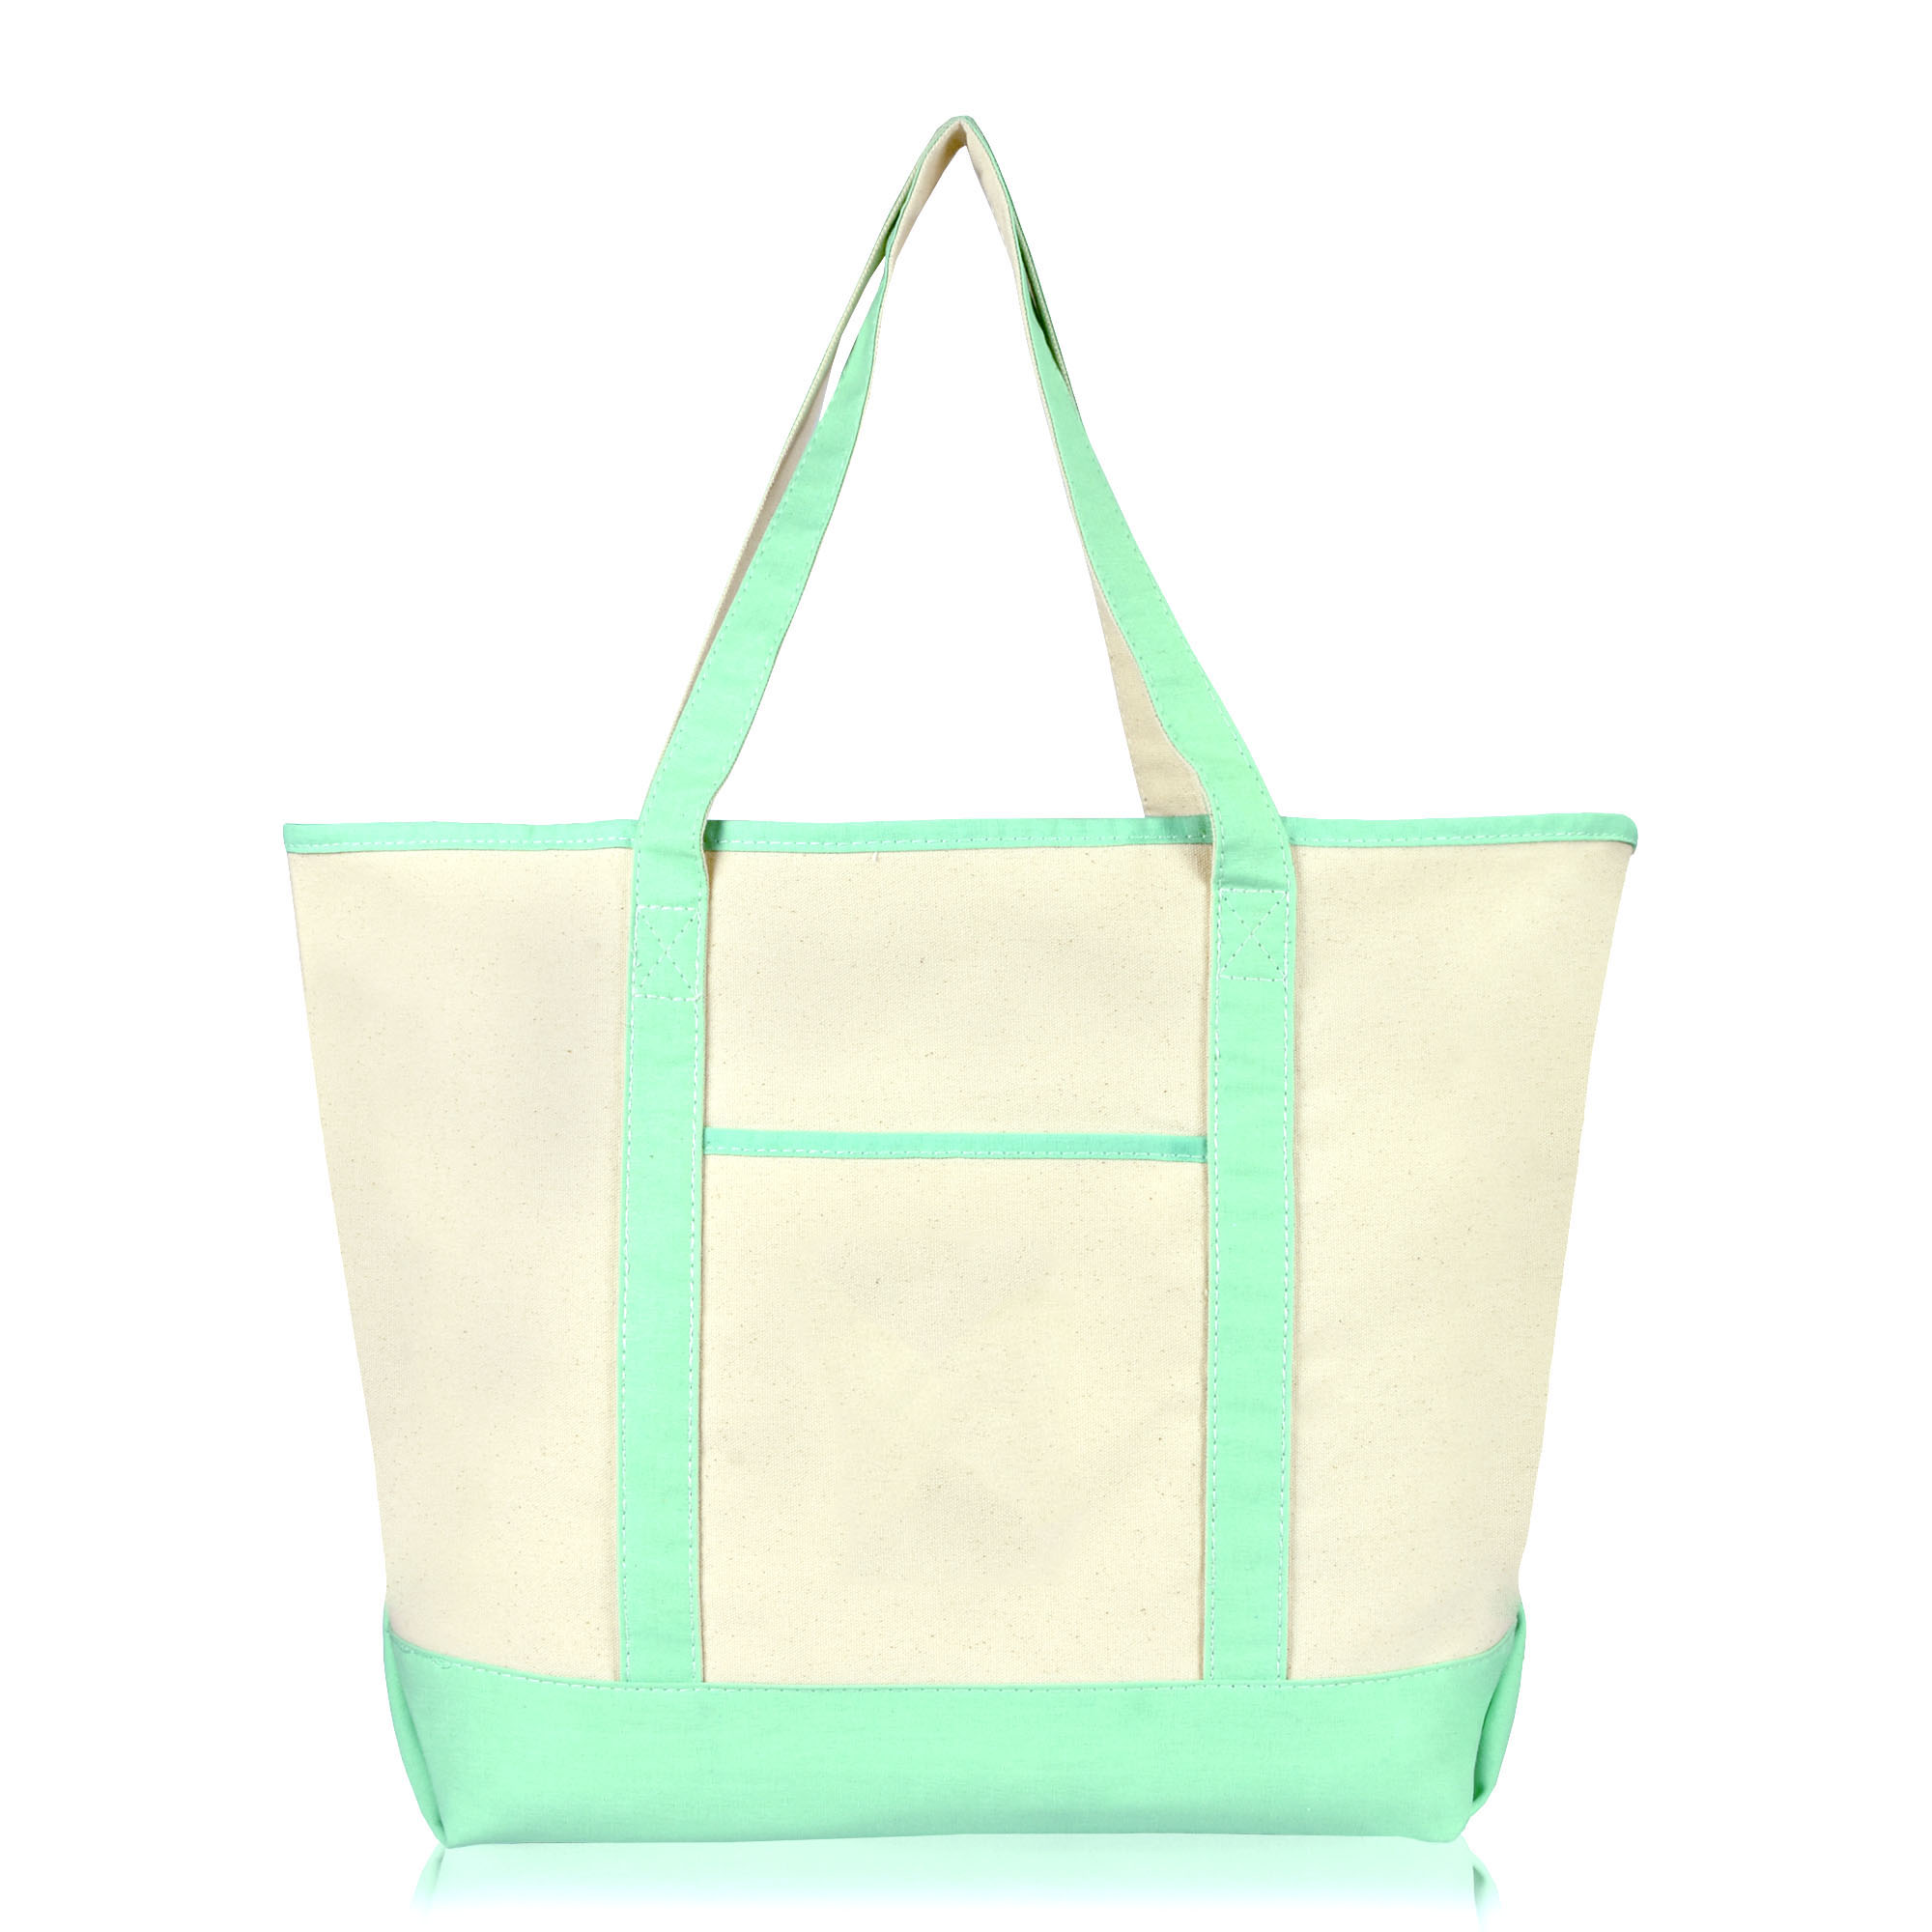 DALIX 22" Open Top Deluxe Tote Bag with Outer Pocket in Mint Green - image 1 of 5